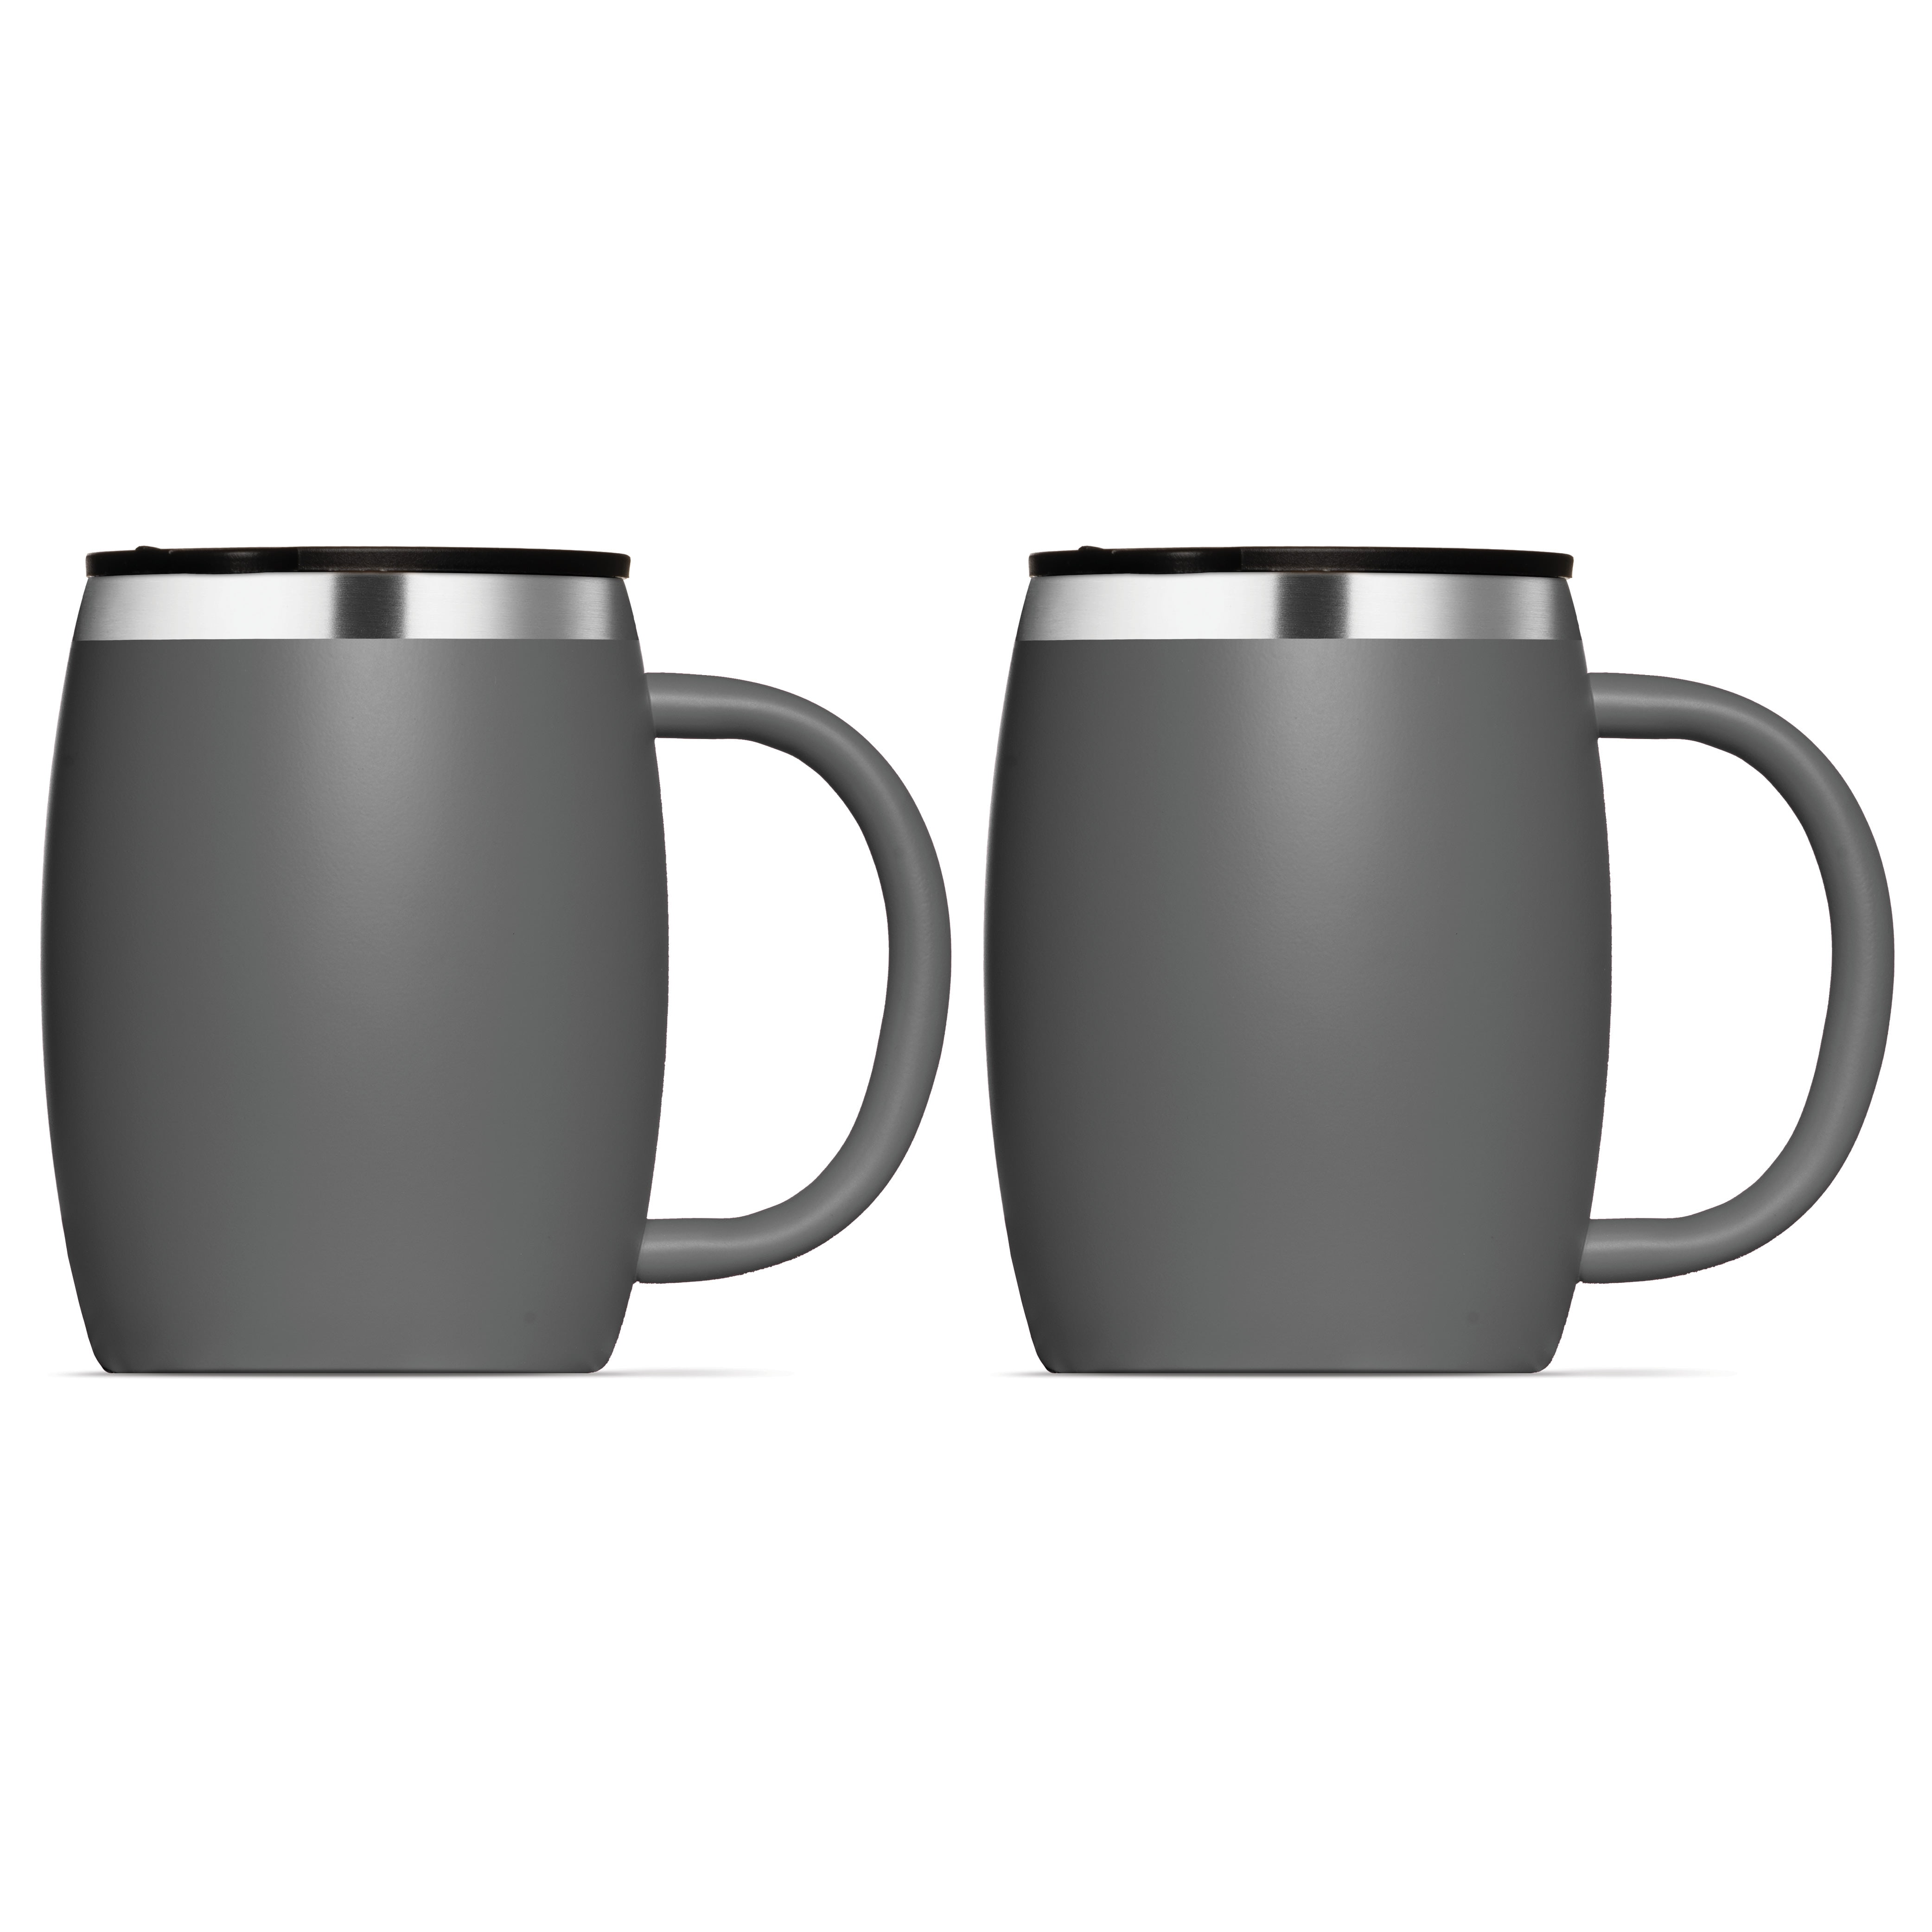 14 oz Set of 2 Double Walled BPA Free Stainless Steel Coffee Mugs with Lids 